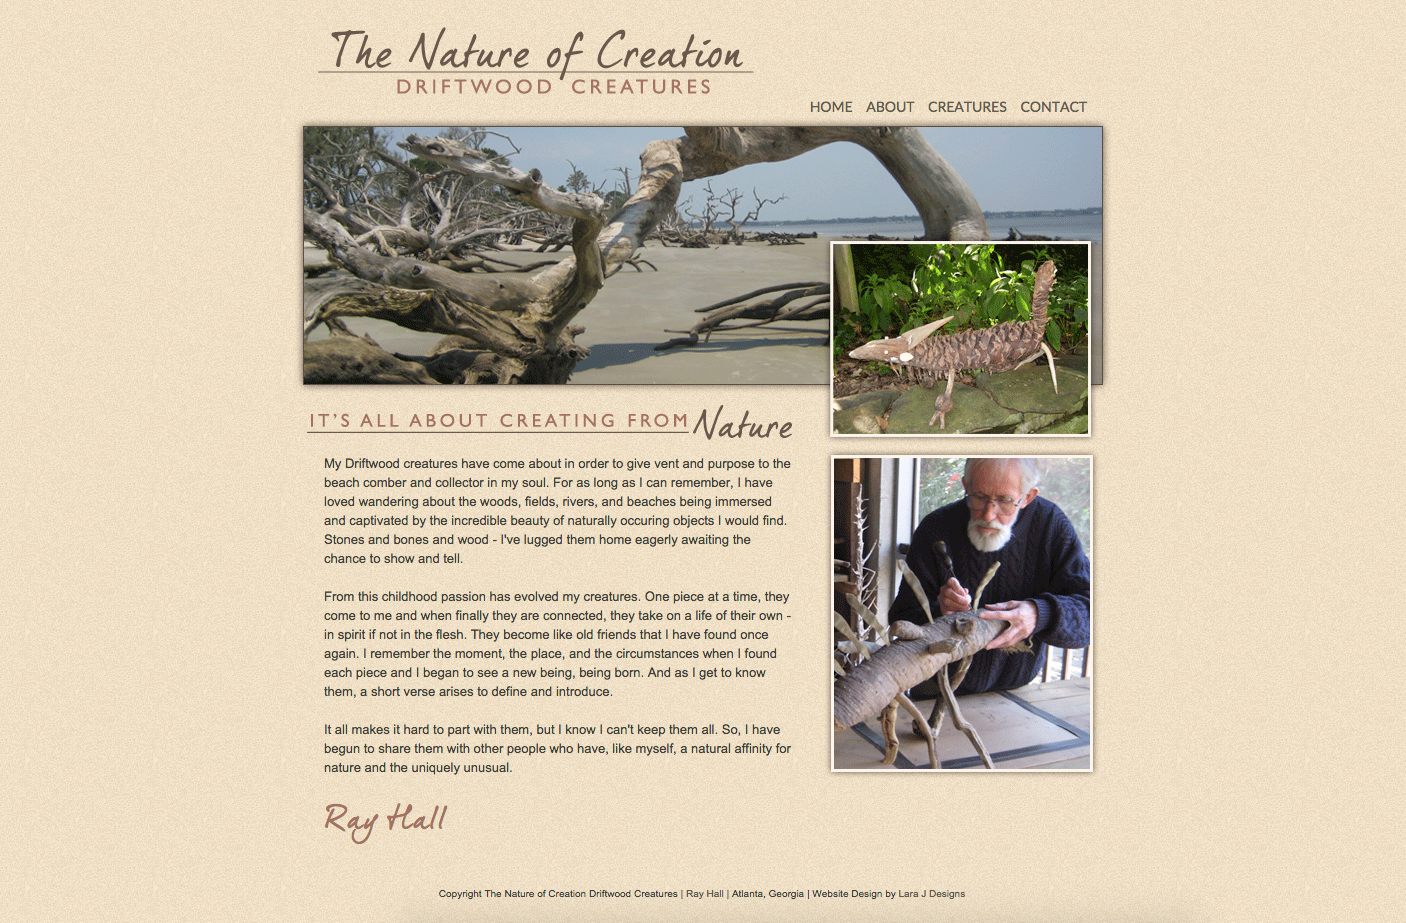 The Nature of Creation Driftwood Creatures Website Design